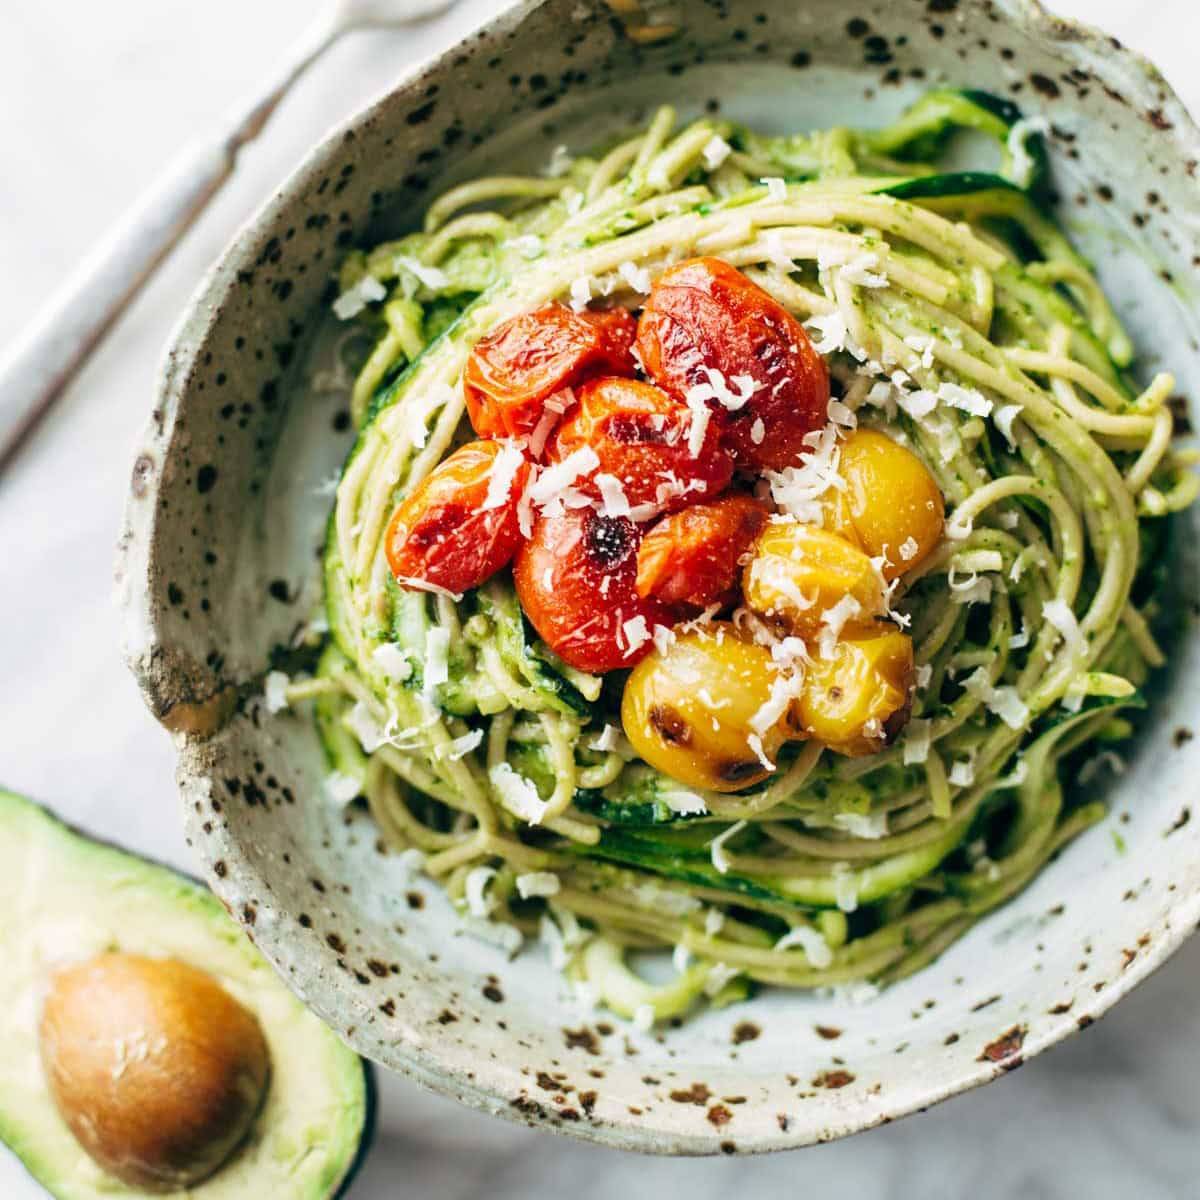 Burst Tomato and Zucchini Spaghetti with Avocado Sauce and a side of half an avocado.